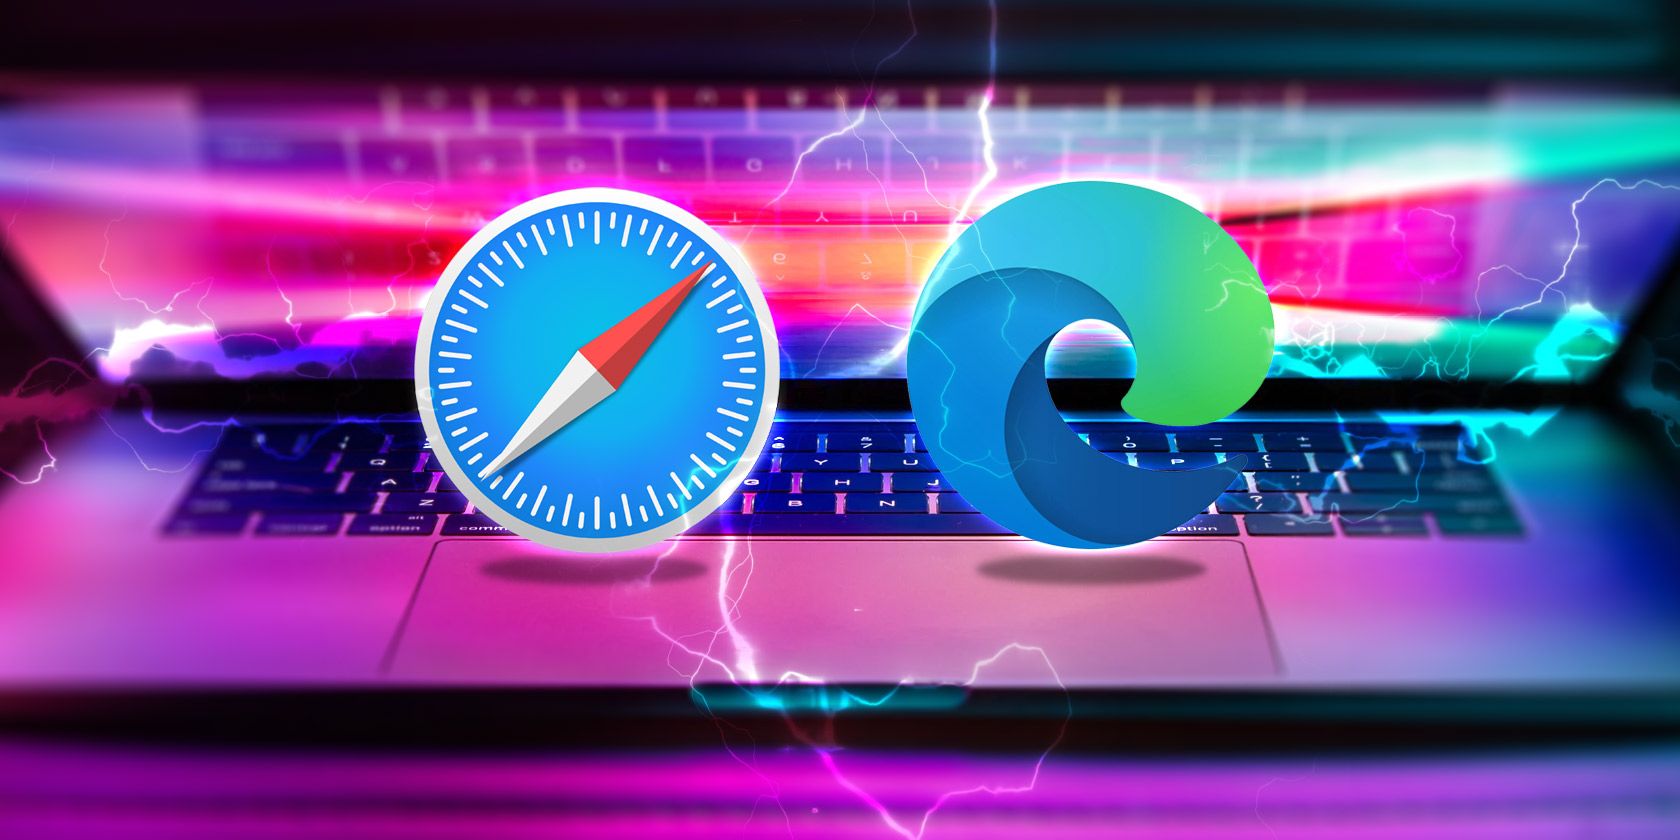 is safari with mac safer than windows for internet